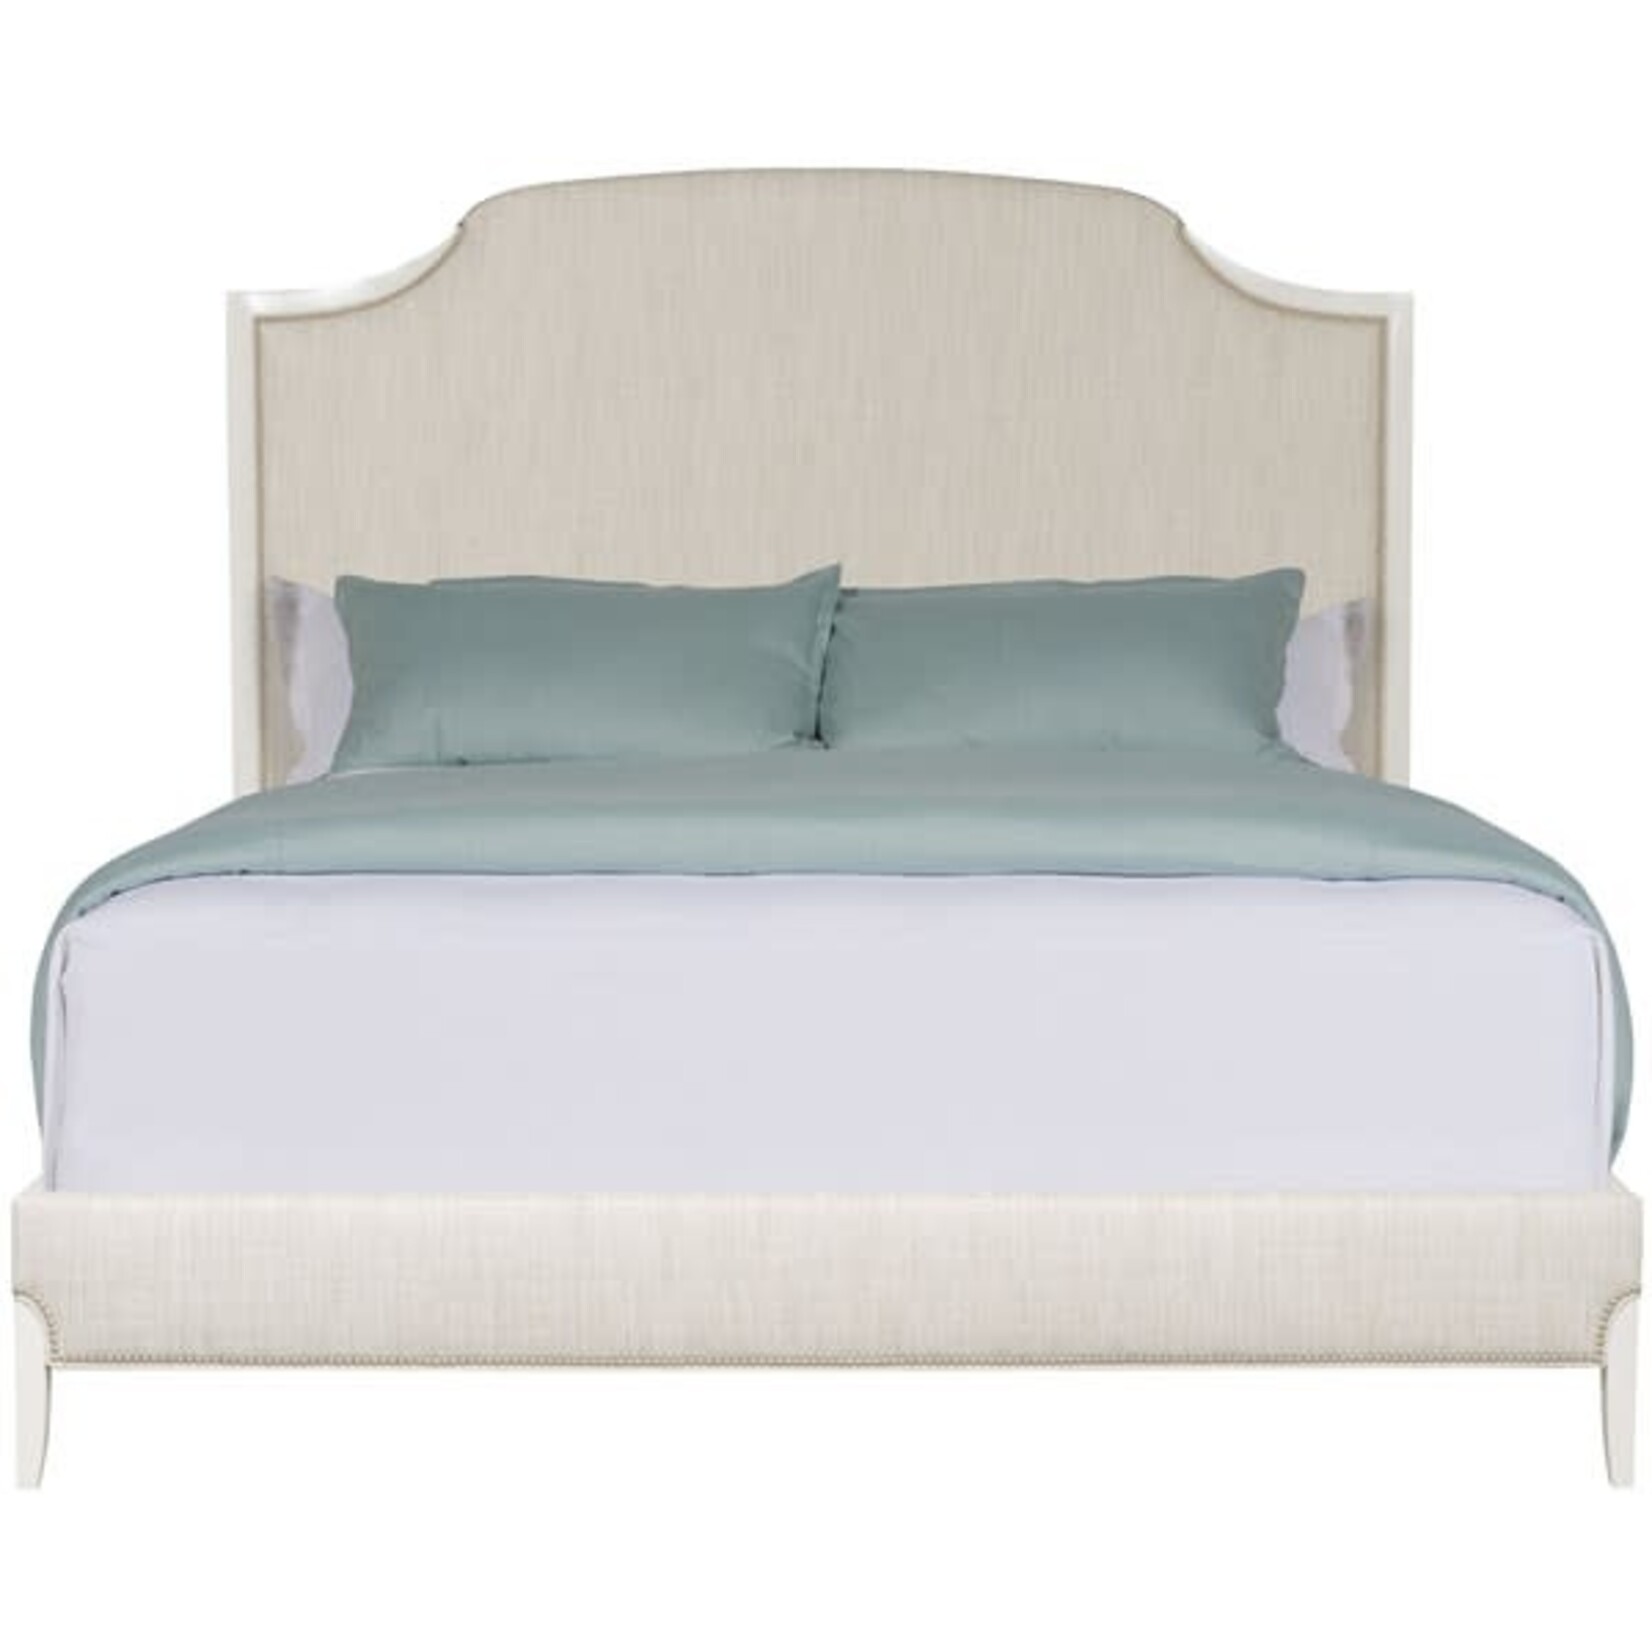 Vanguard Furniture Lillet Stocked King Bed  Neiman Pearl  Sparrow Finish